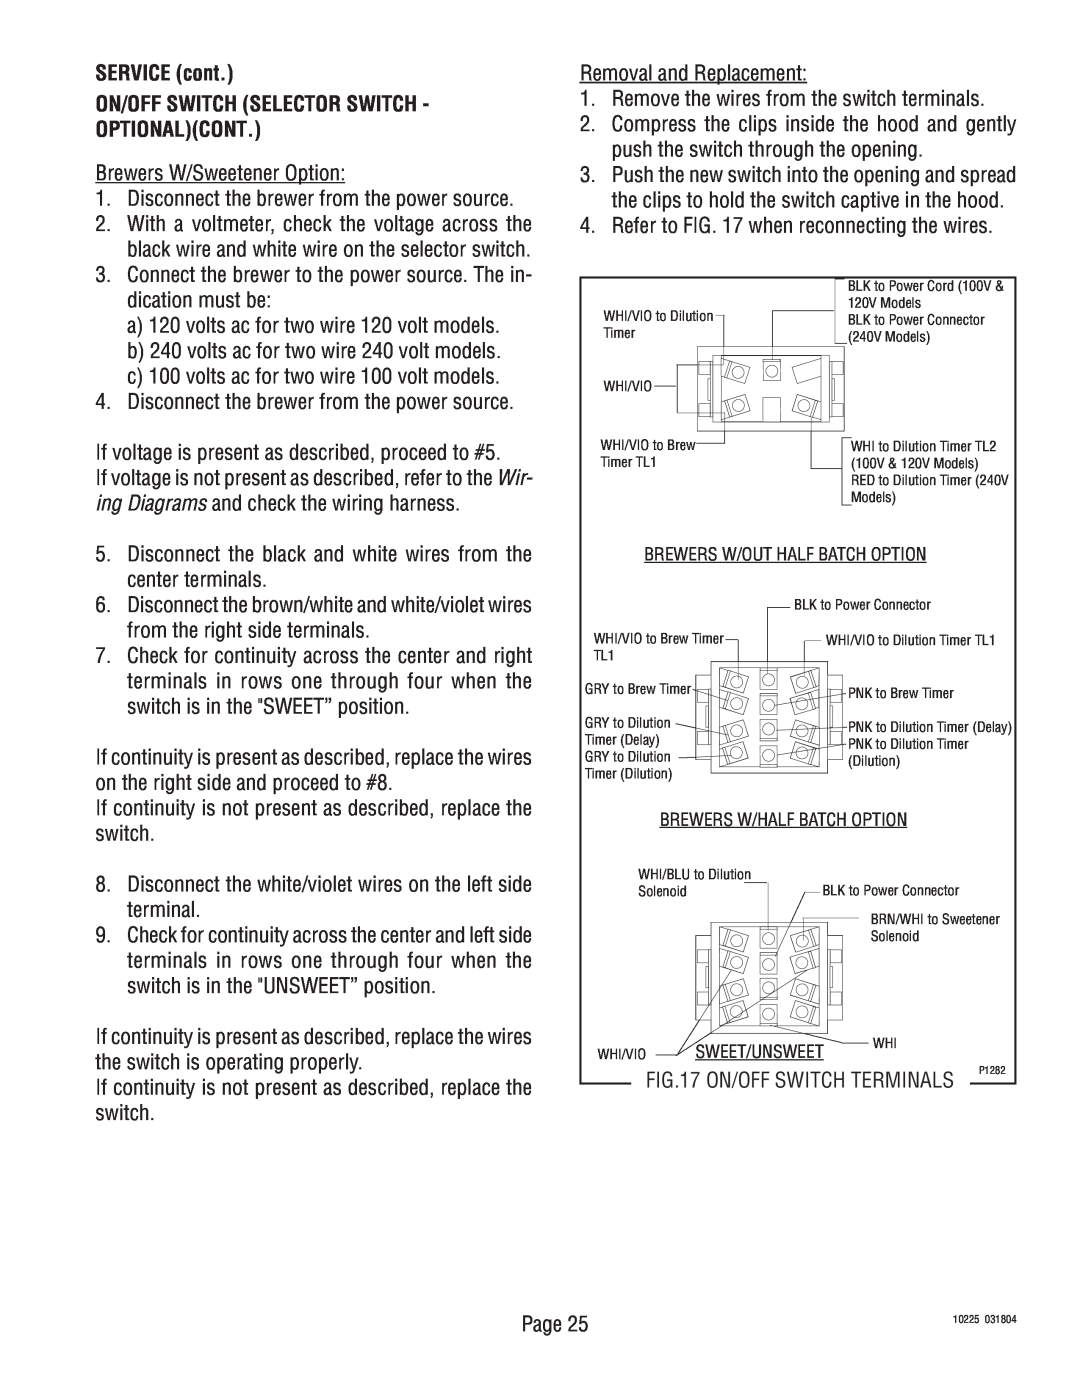 Bunn TU3 service manual SERVICE cont, On/Off Switch Selector Switch - Optionalcont 